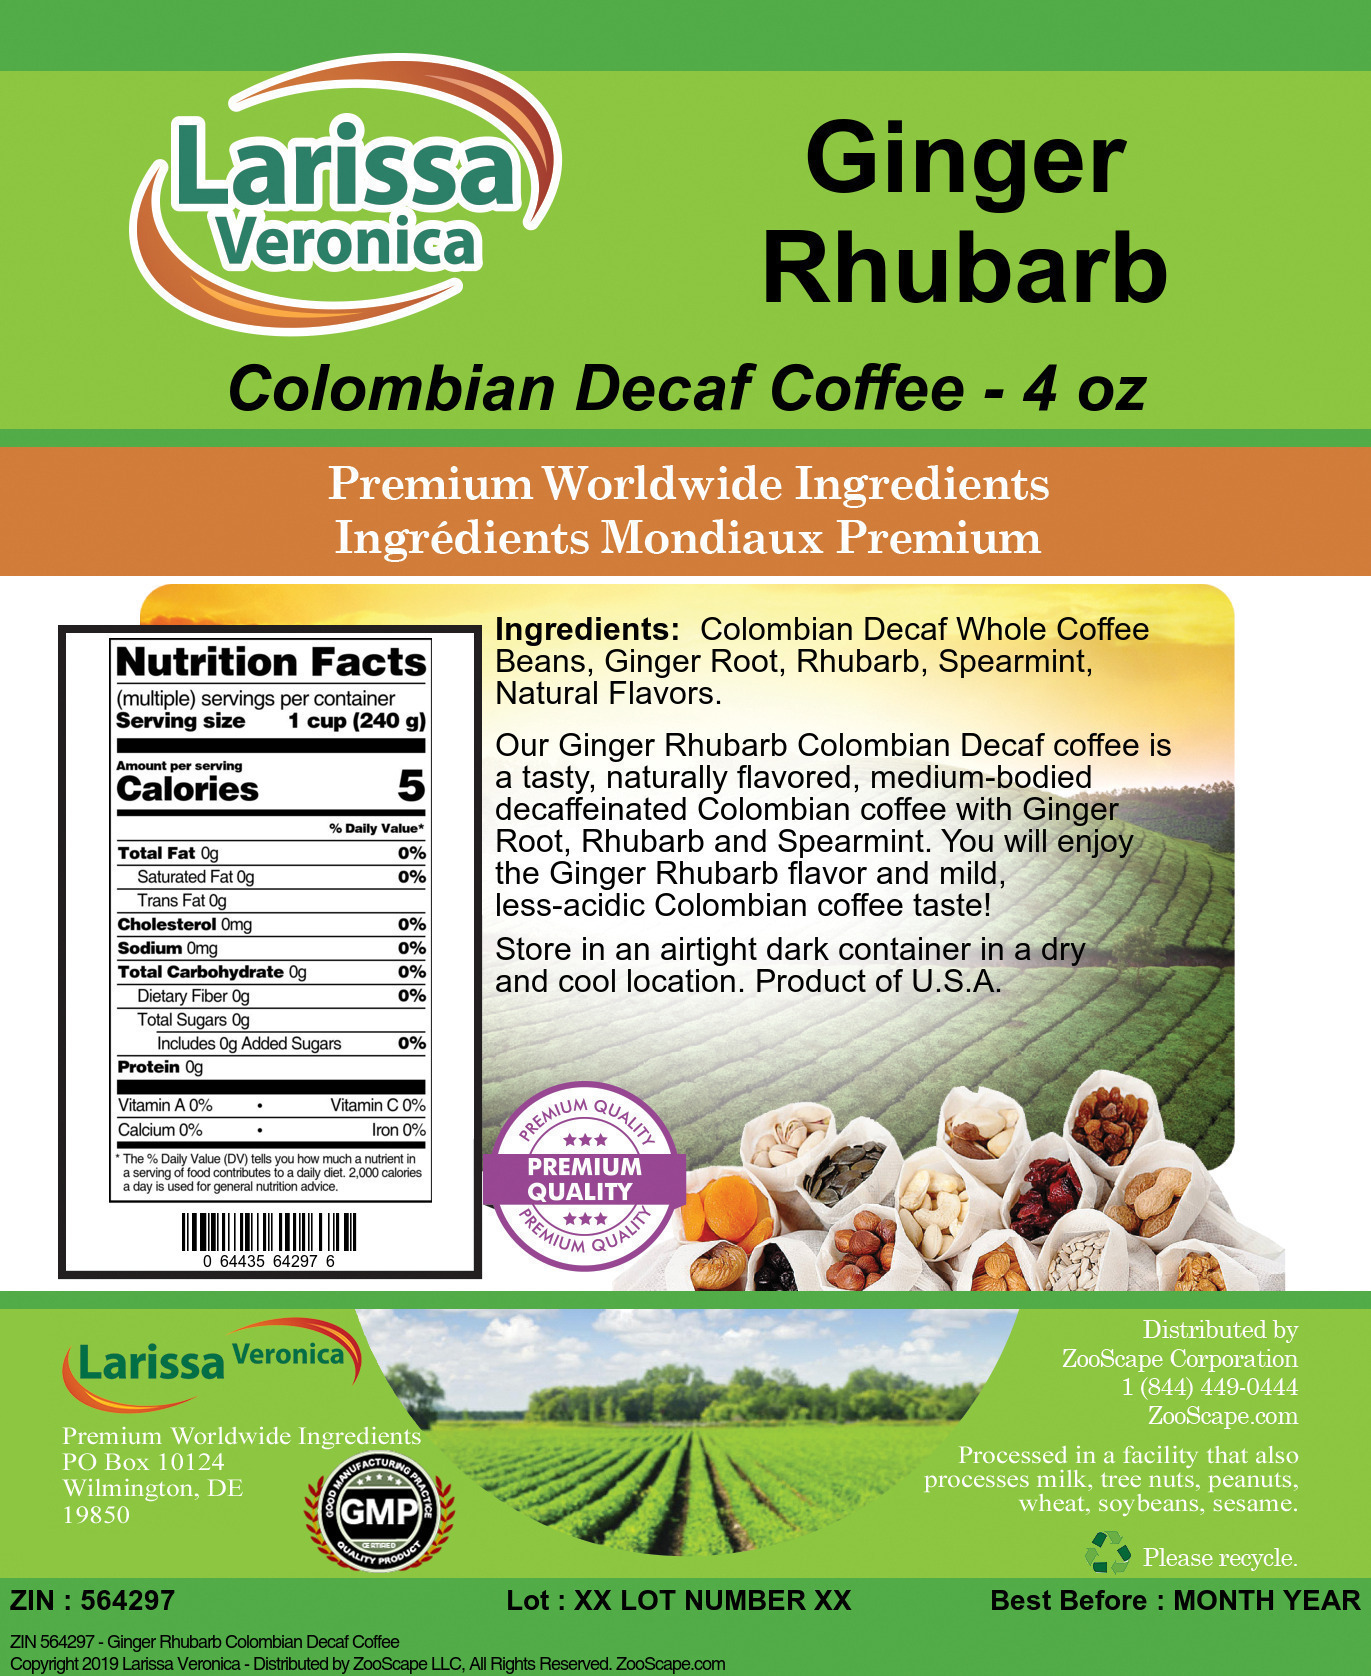 Ginger Rhubarb Colombian Decaf Coffee - Label